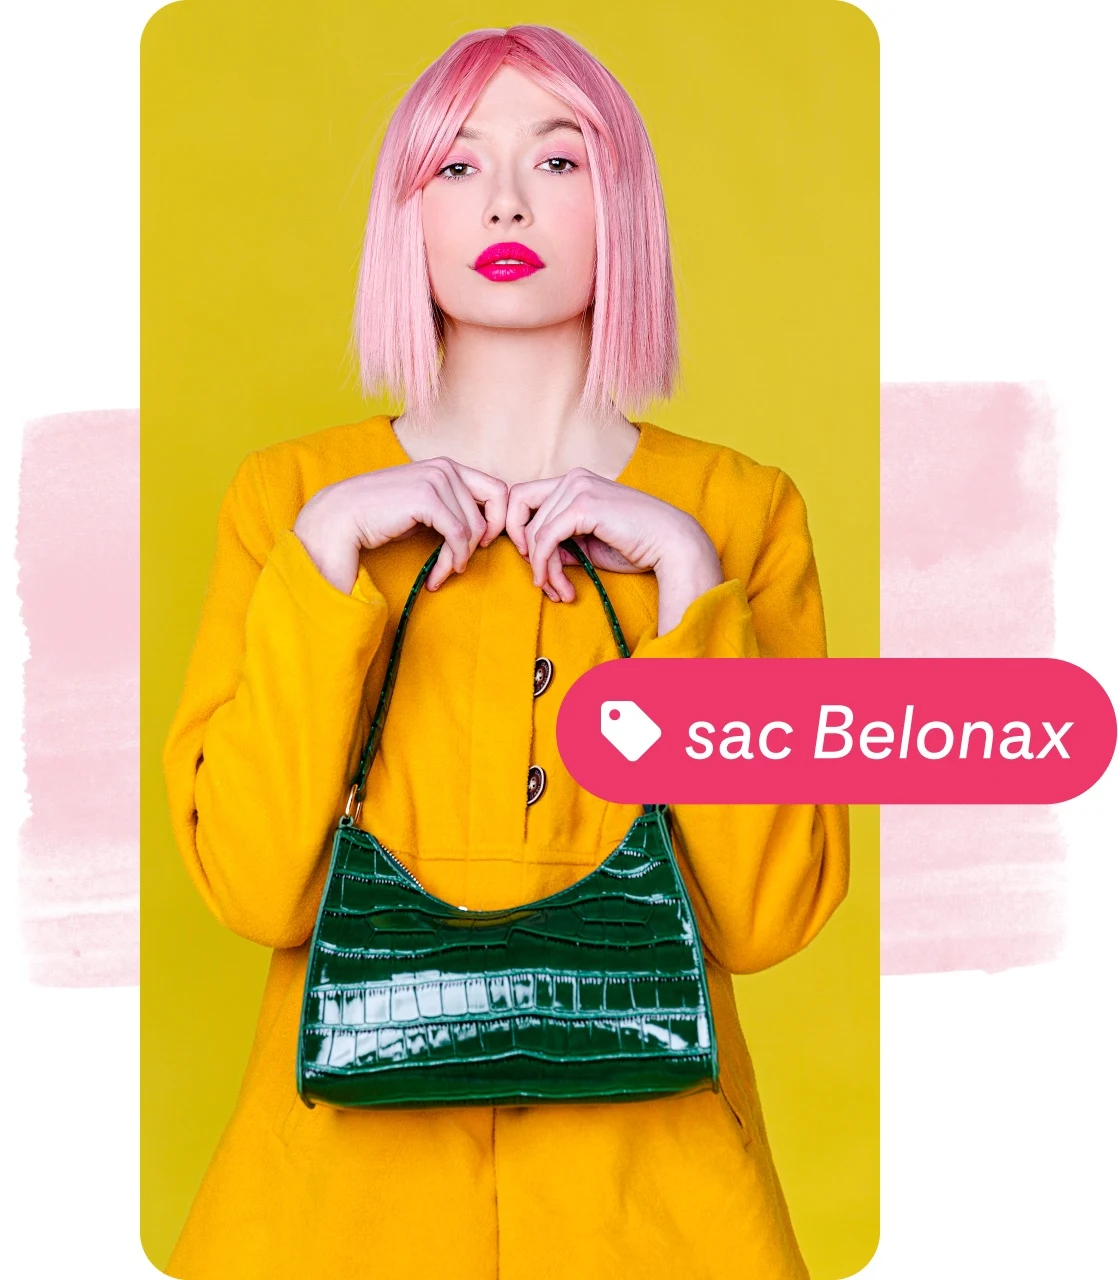 Pin collage of a woman with pink hair and yellow coat holding a green handbag, with a pink product tag.